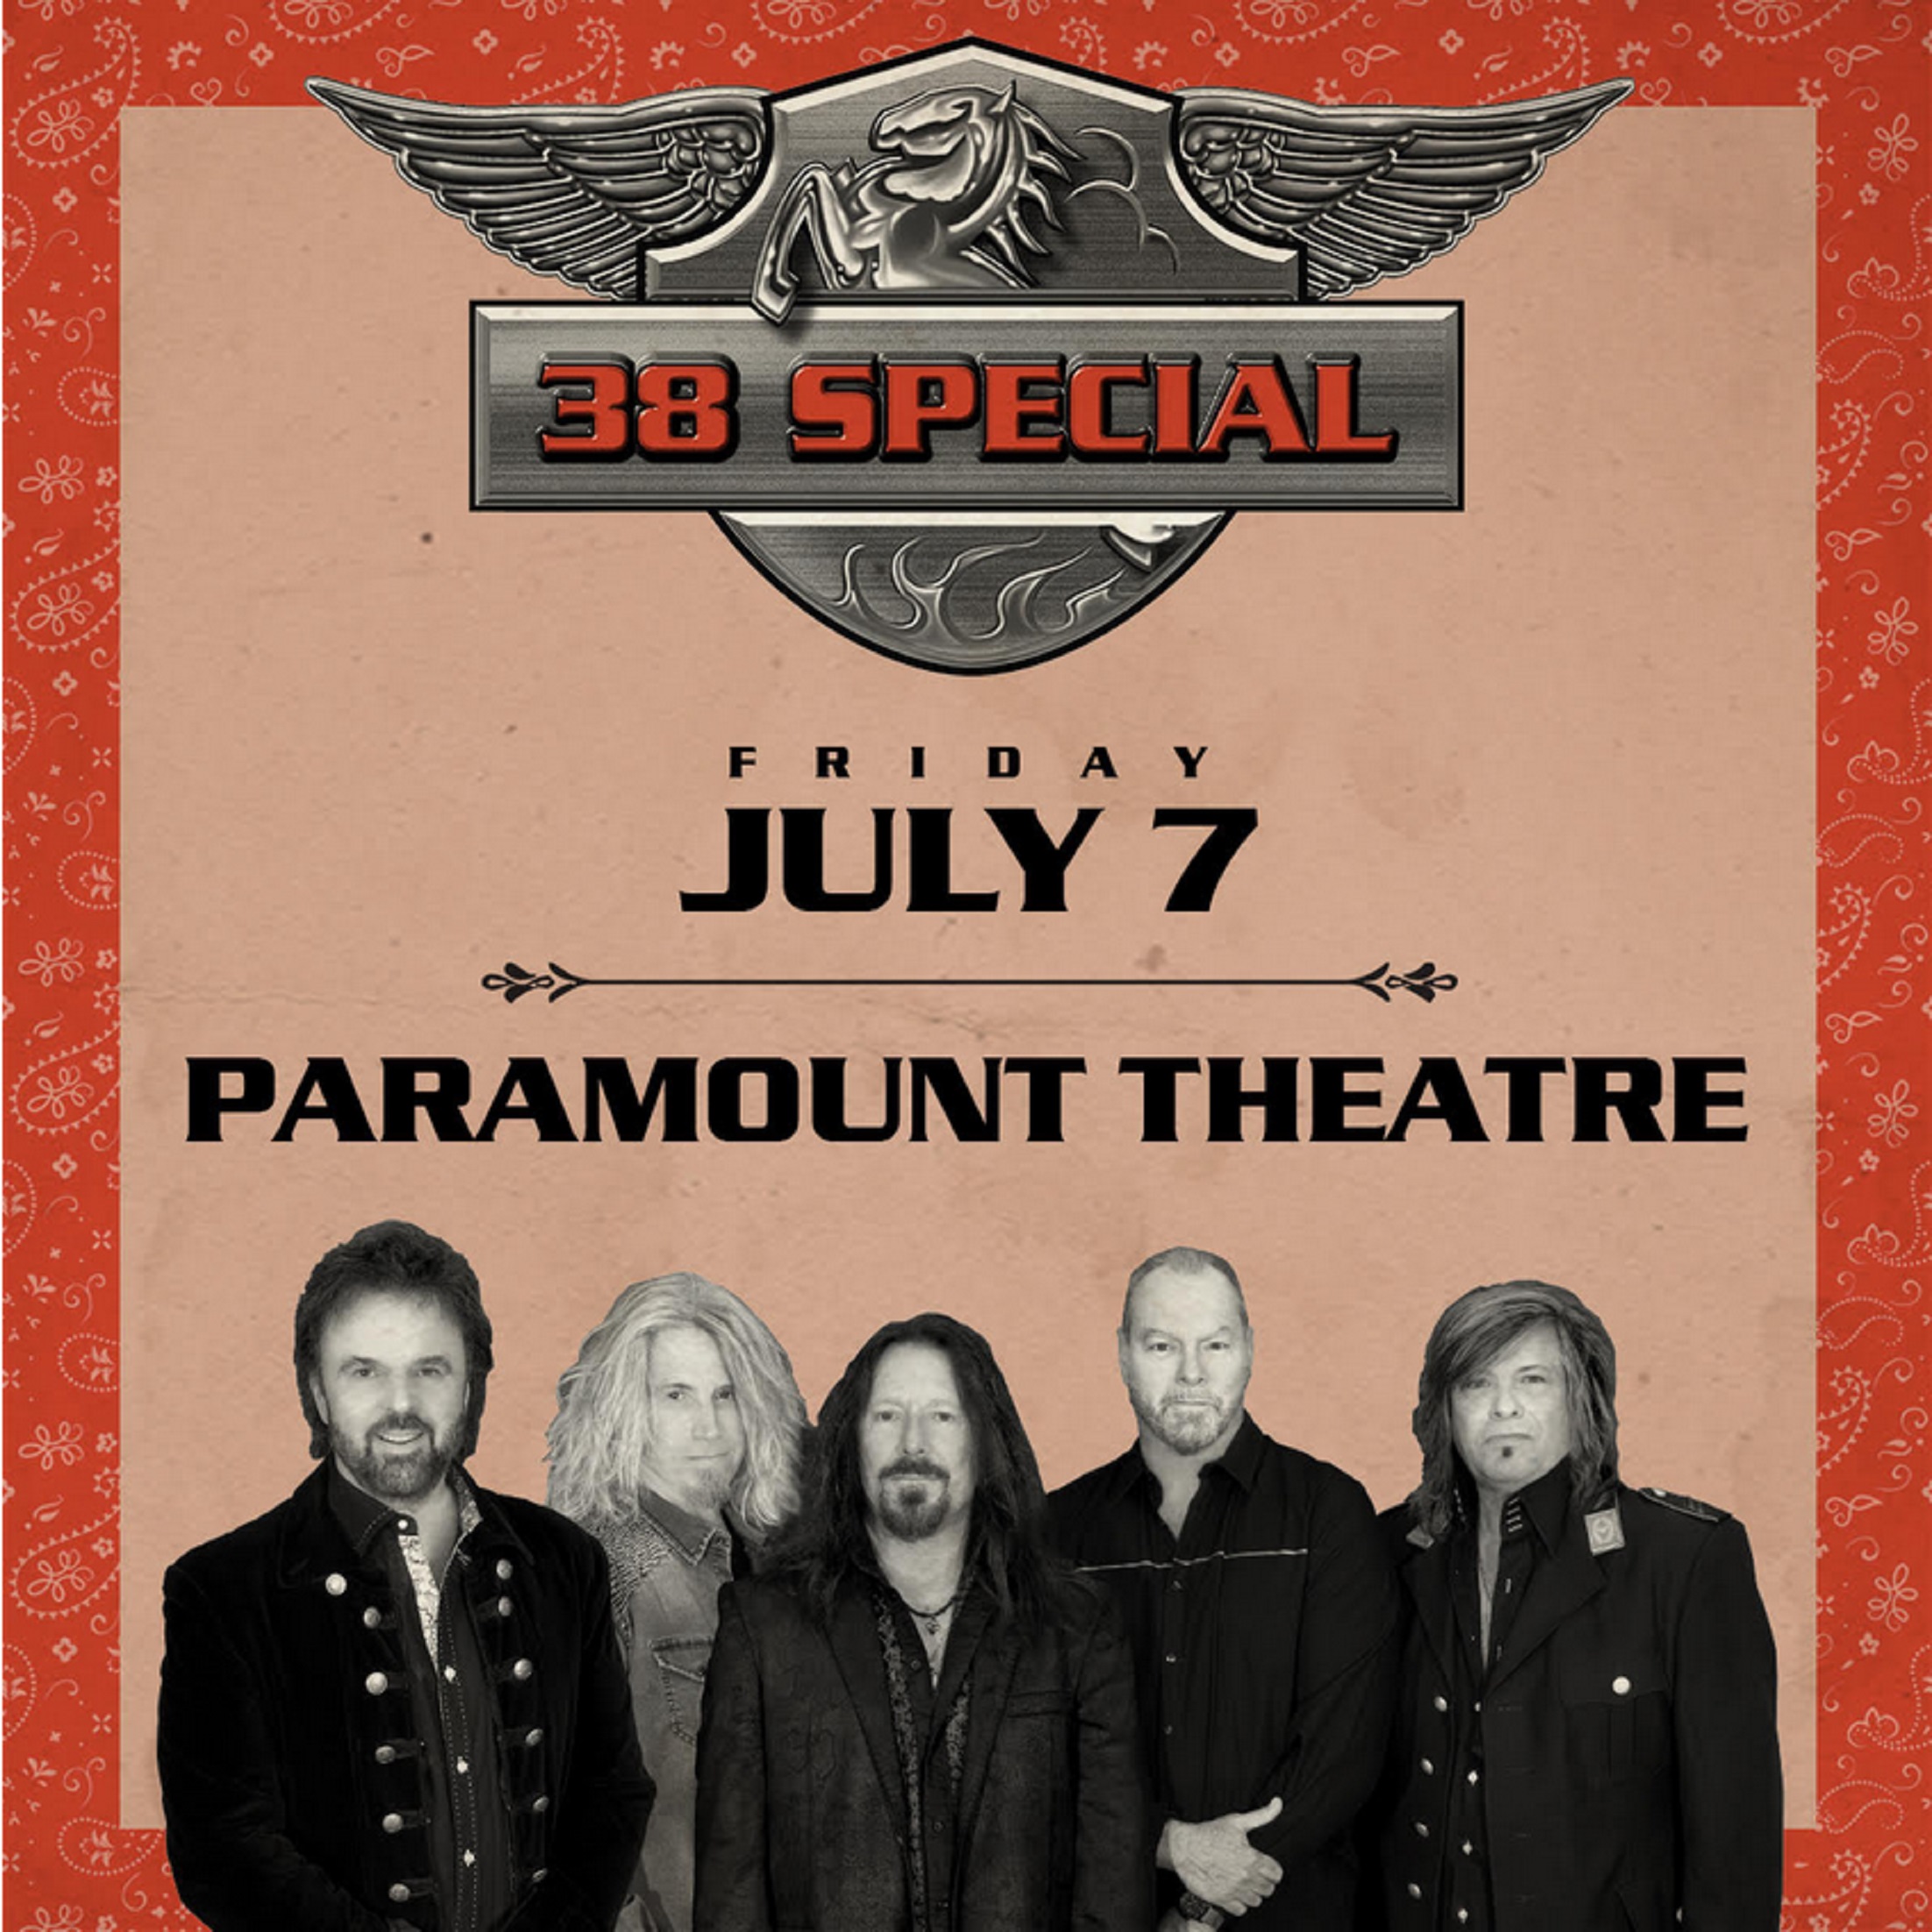 38 Special live at Paramount Theatre on Friday, July 7, 2023